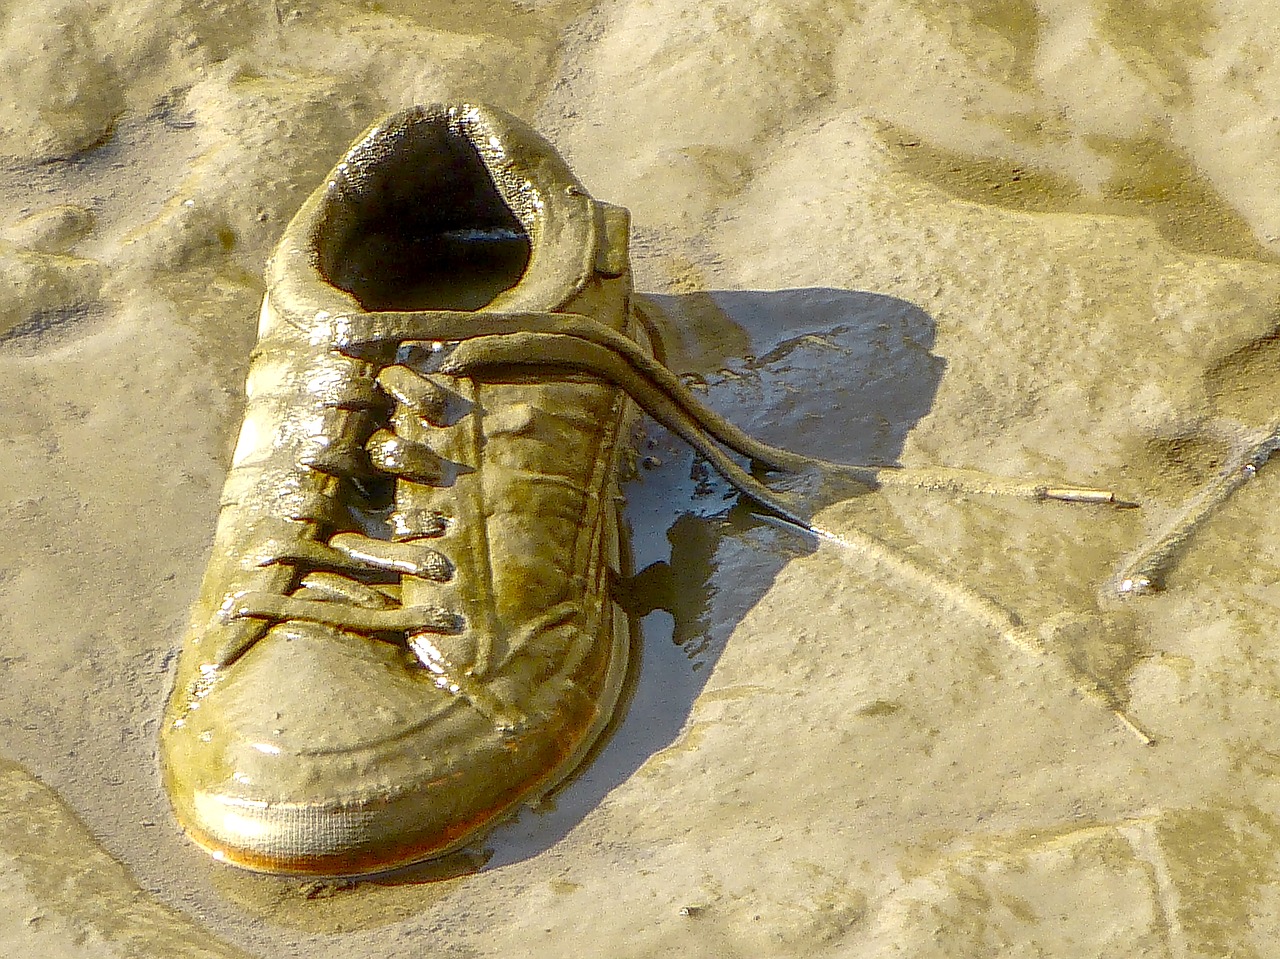 sneaker shoes mud free photo